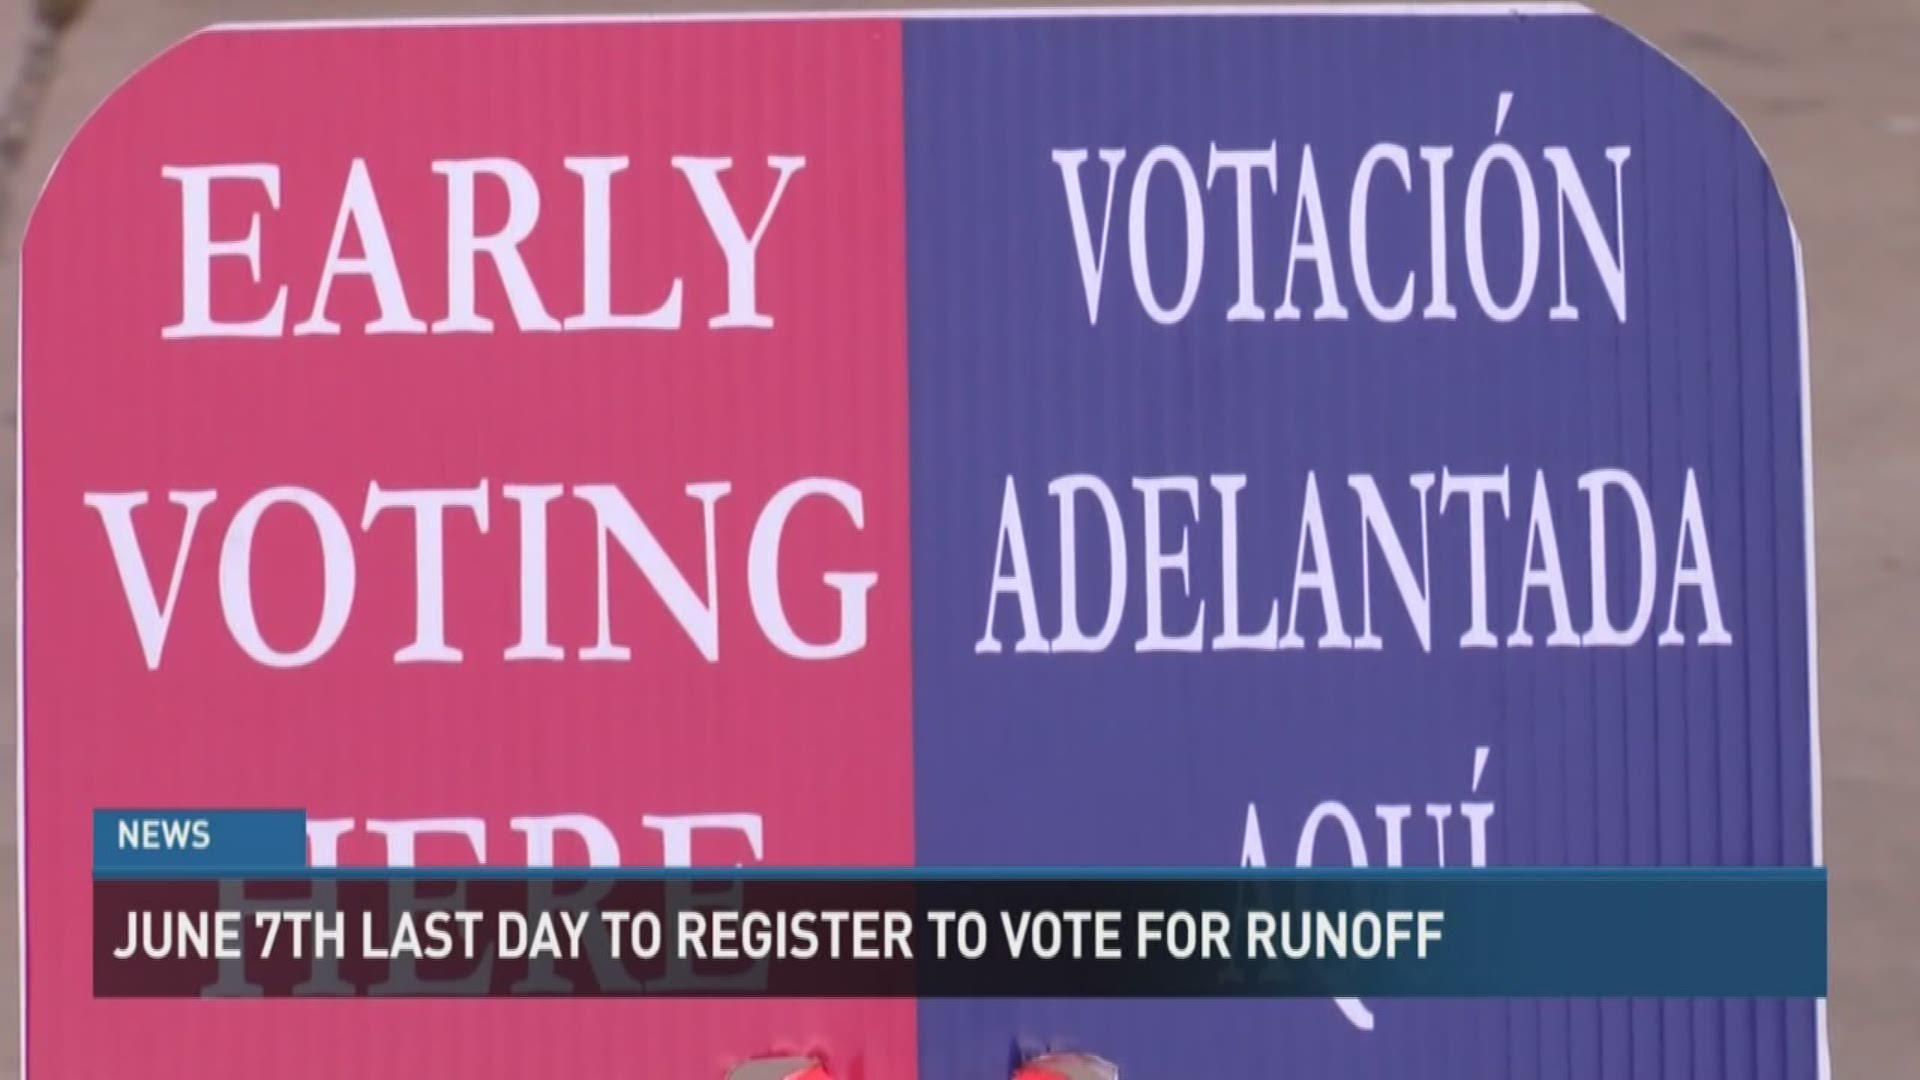 Wednesday, June 7 is your last day to get it done if you want to vote in the July 8 runoff election.